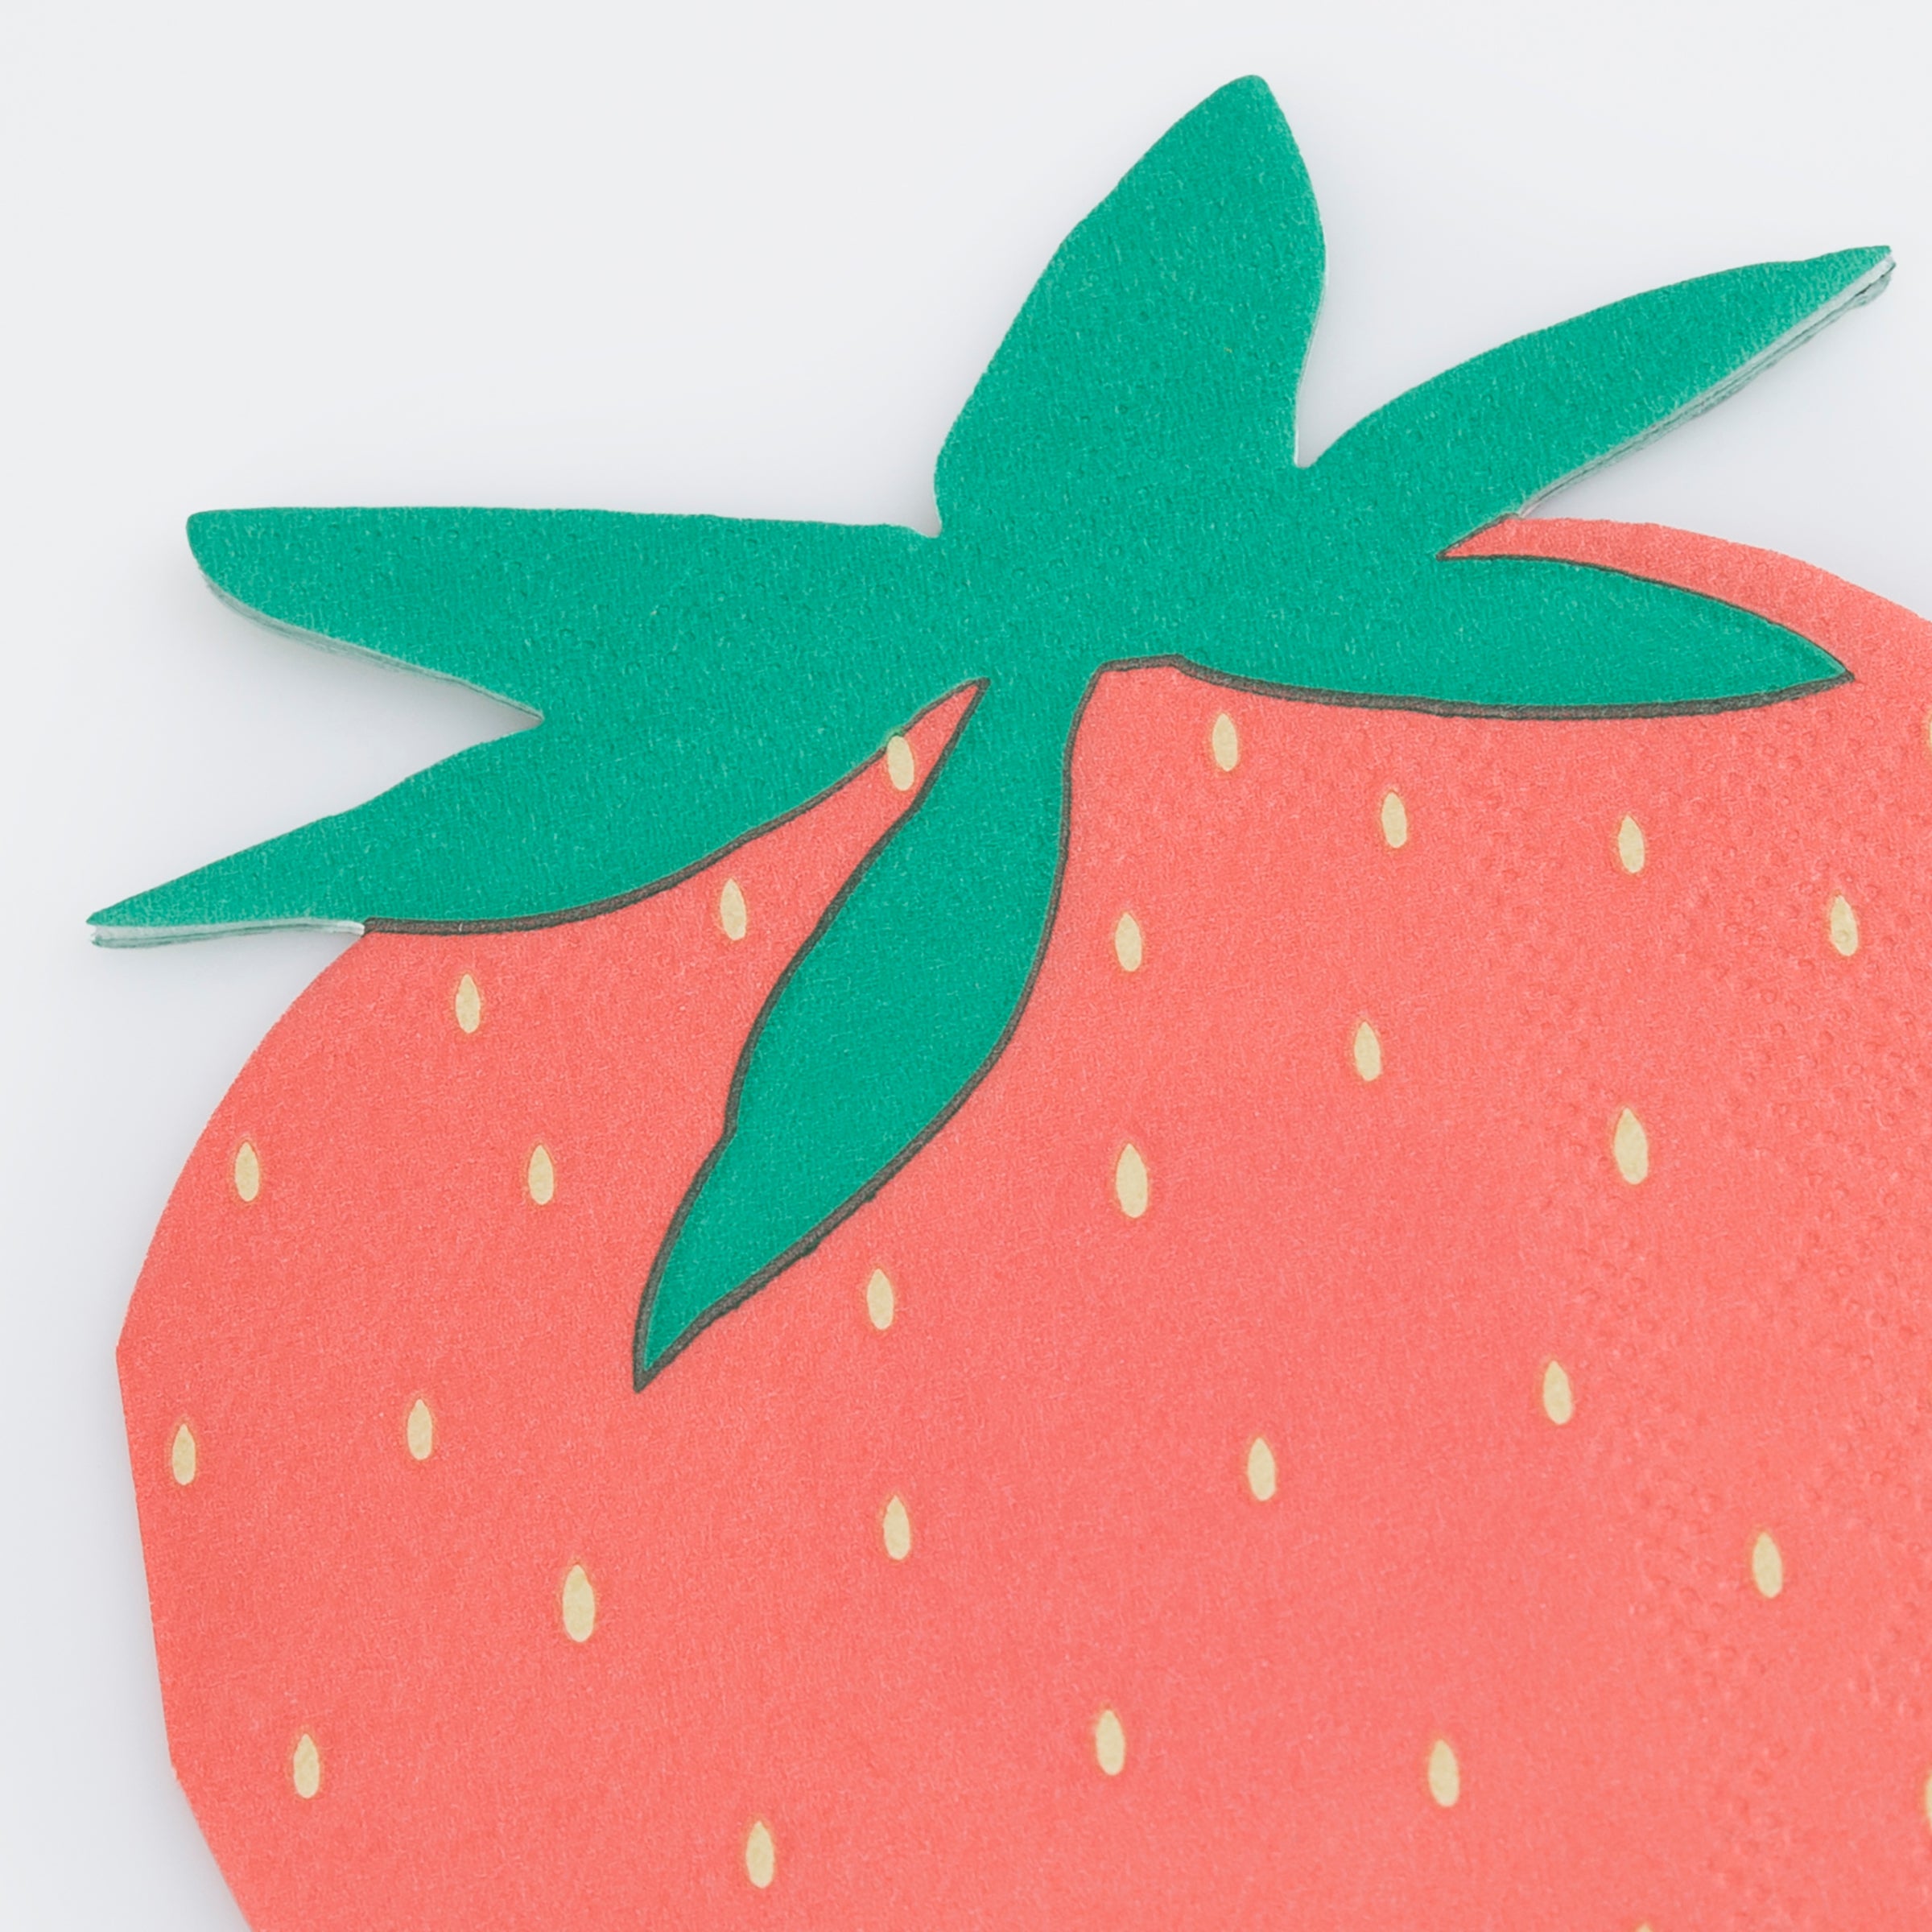 Our party napkins, designed to look like ripe strawberries, are ideal to make any party look summery.